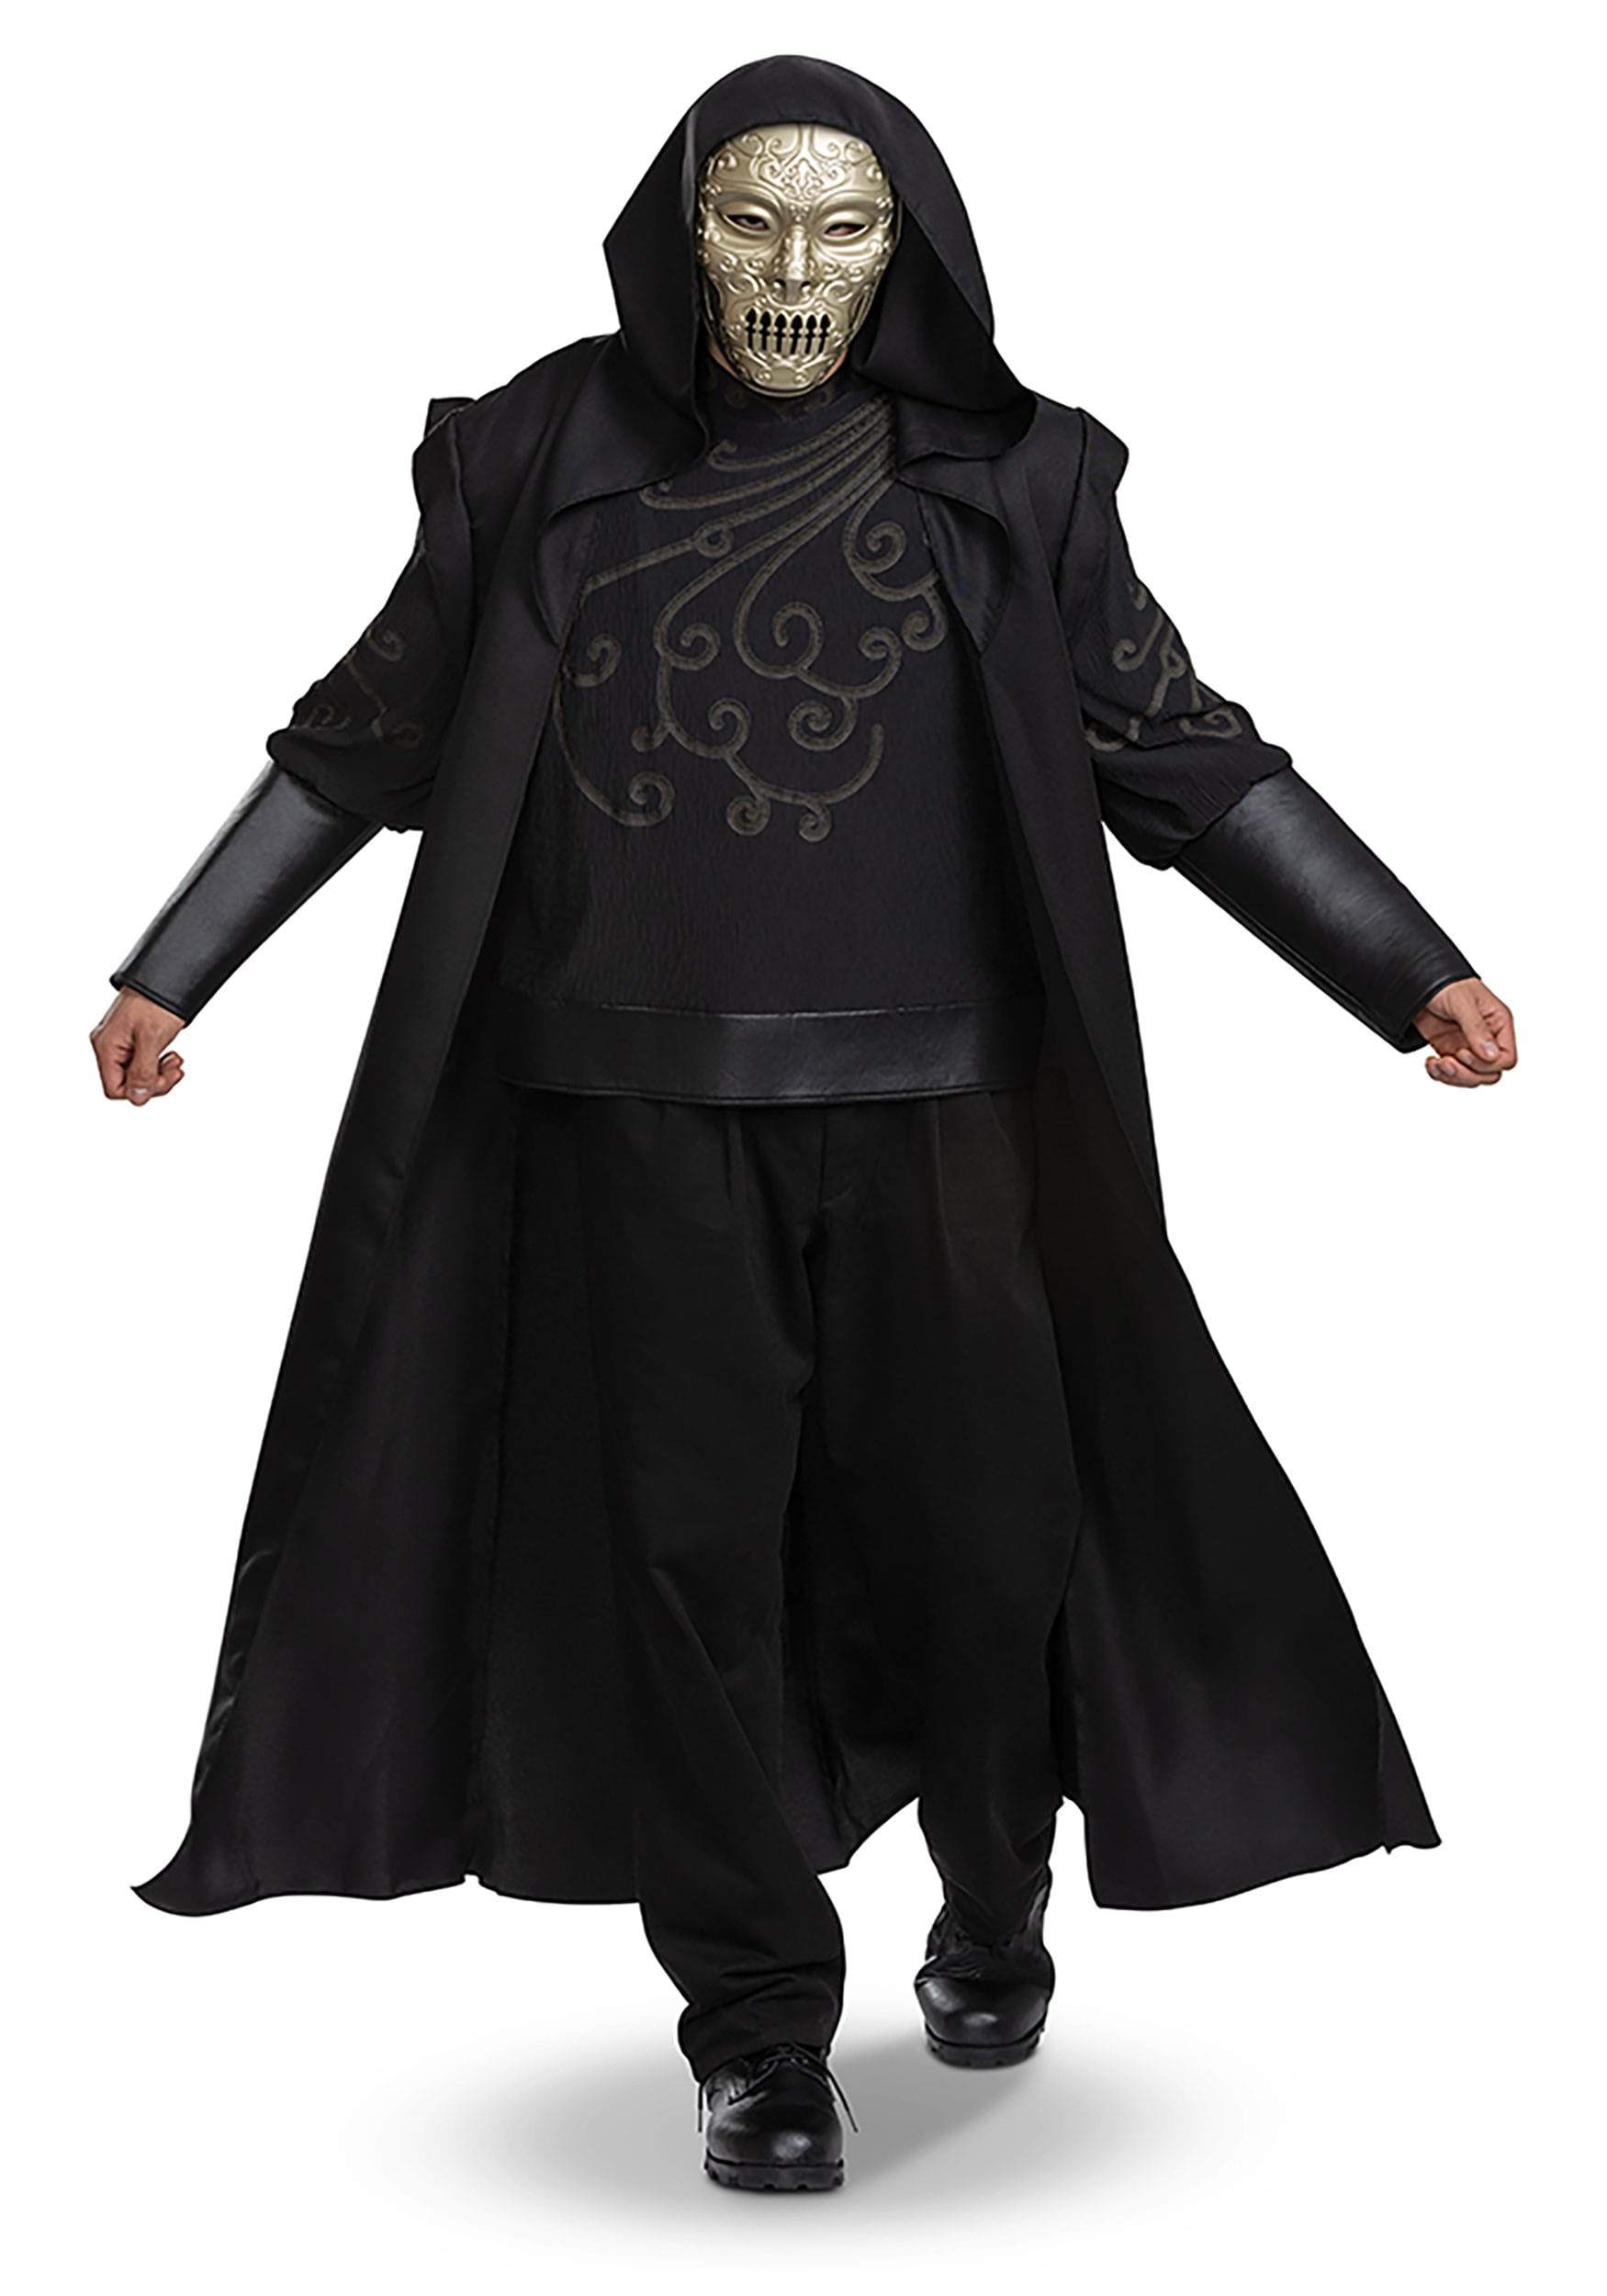 Potter Deluxe Death Eater Costume for Adults